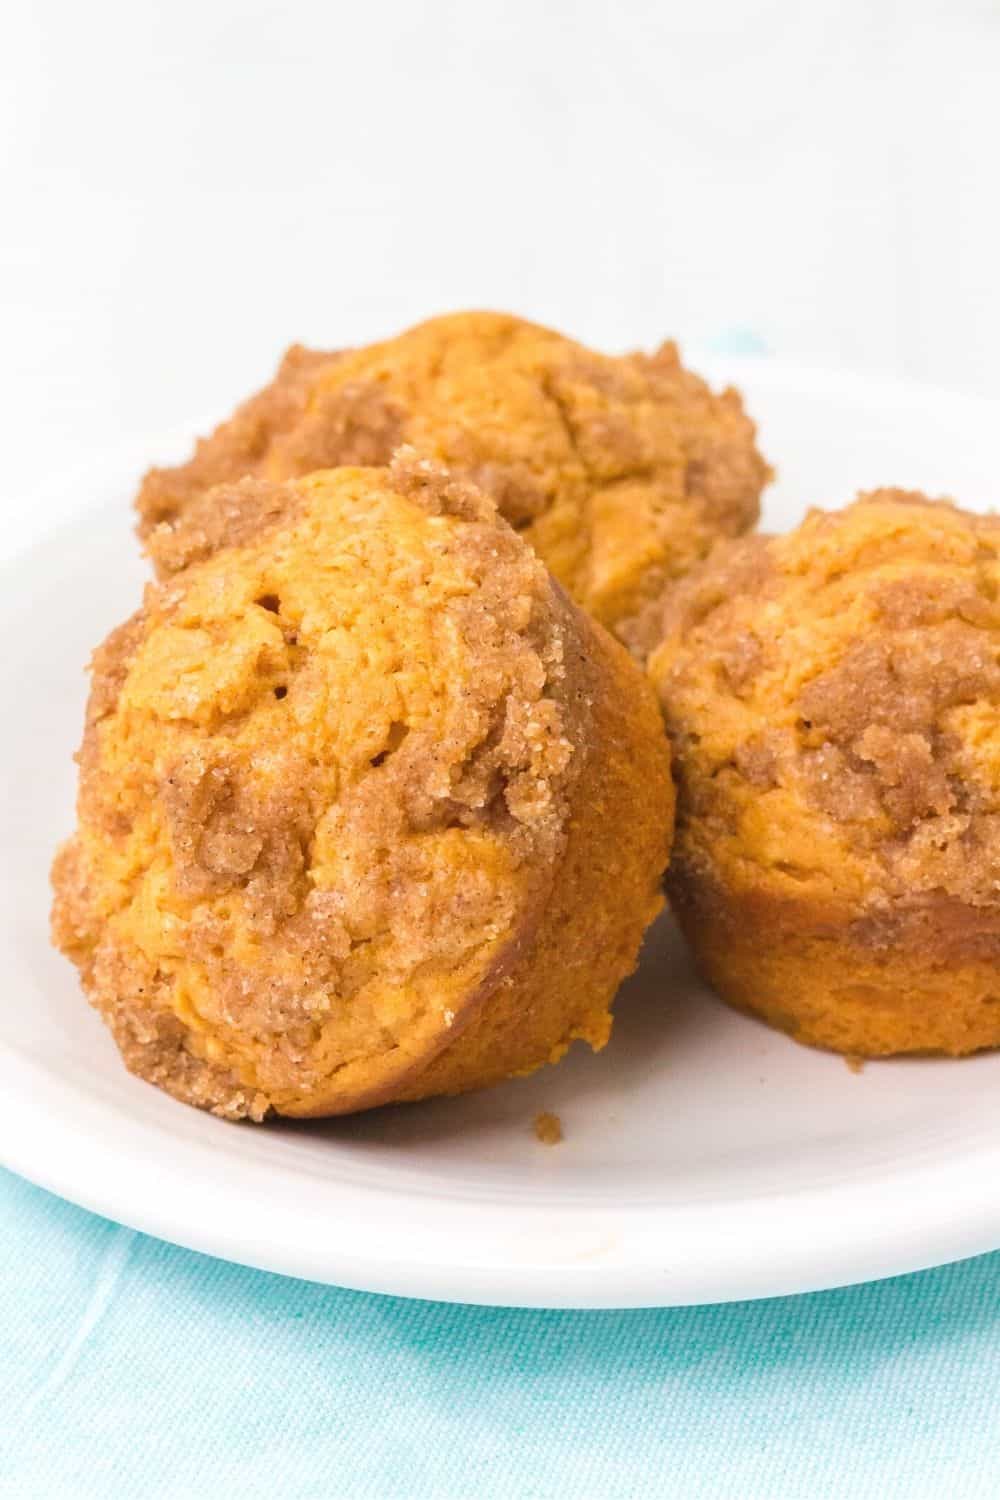 three homemade sweet potato muffins topped with cinnamon sugar streusel, served on a white plate.